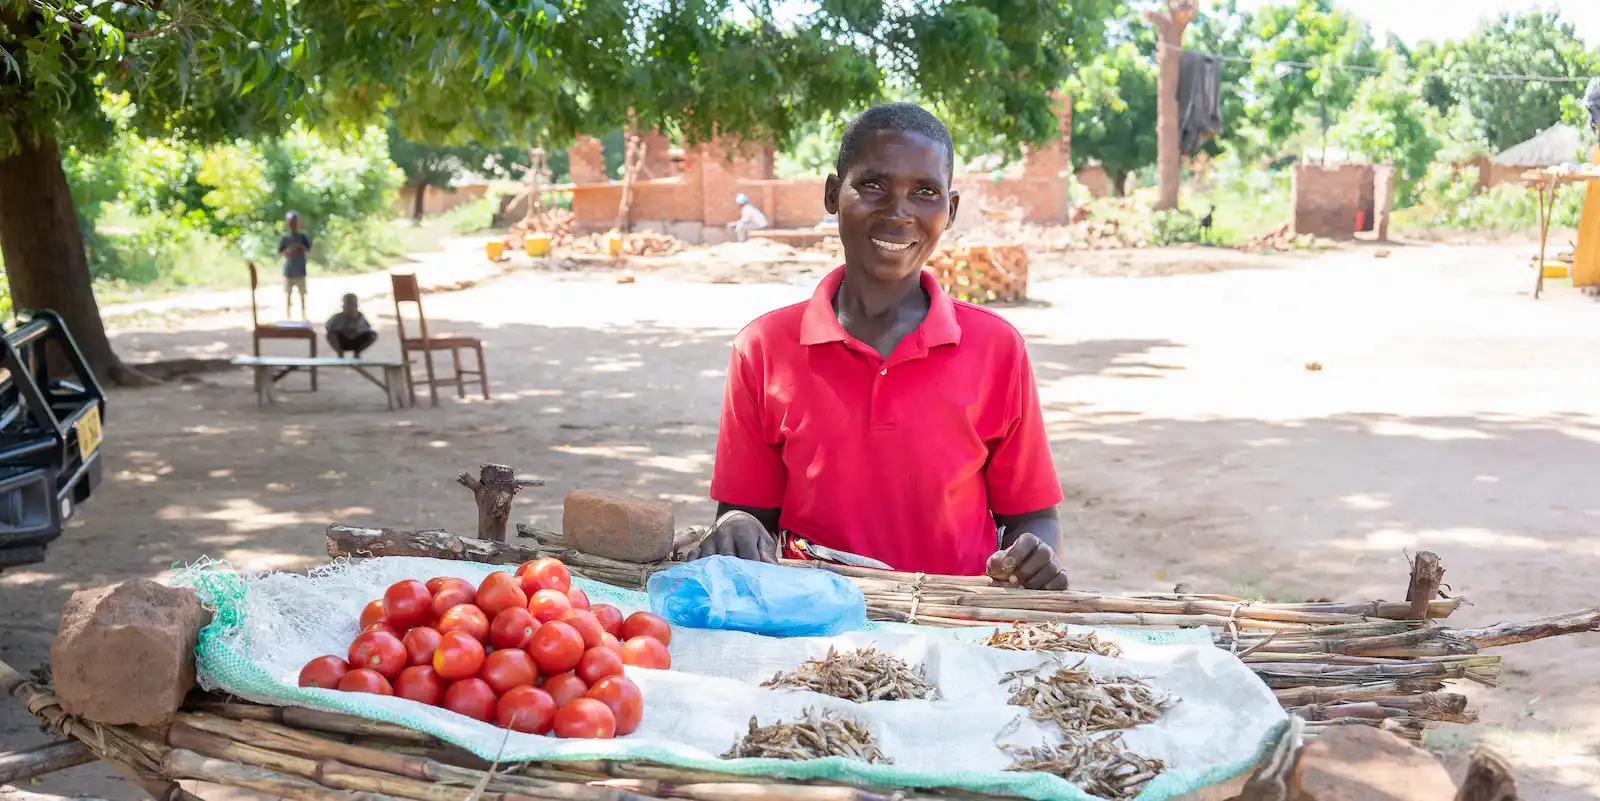 A trader in Malawi with fresh produce